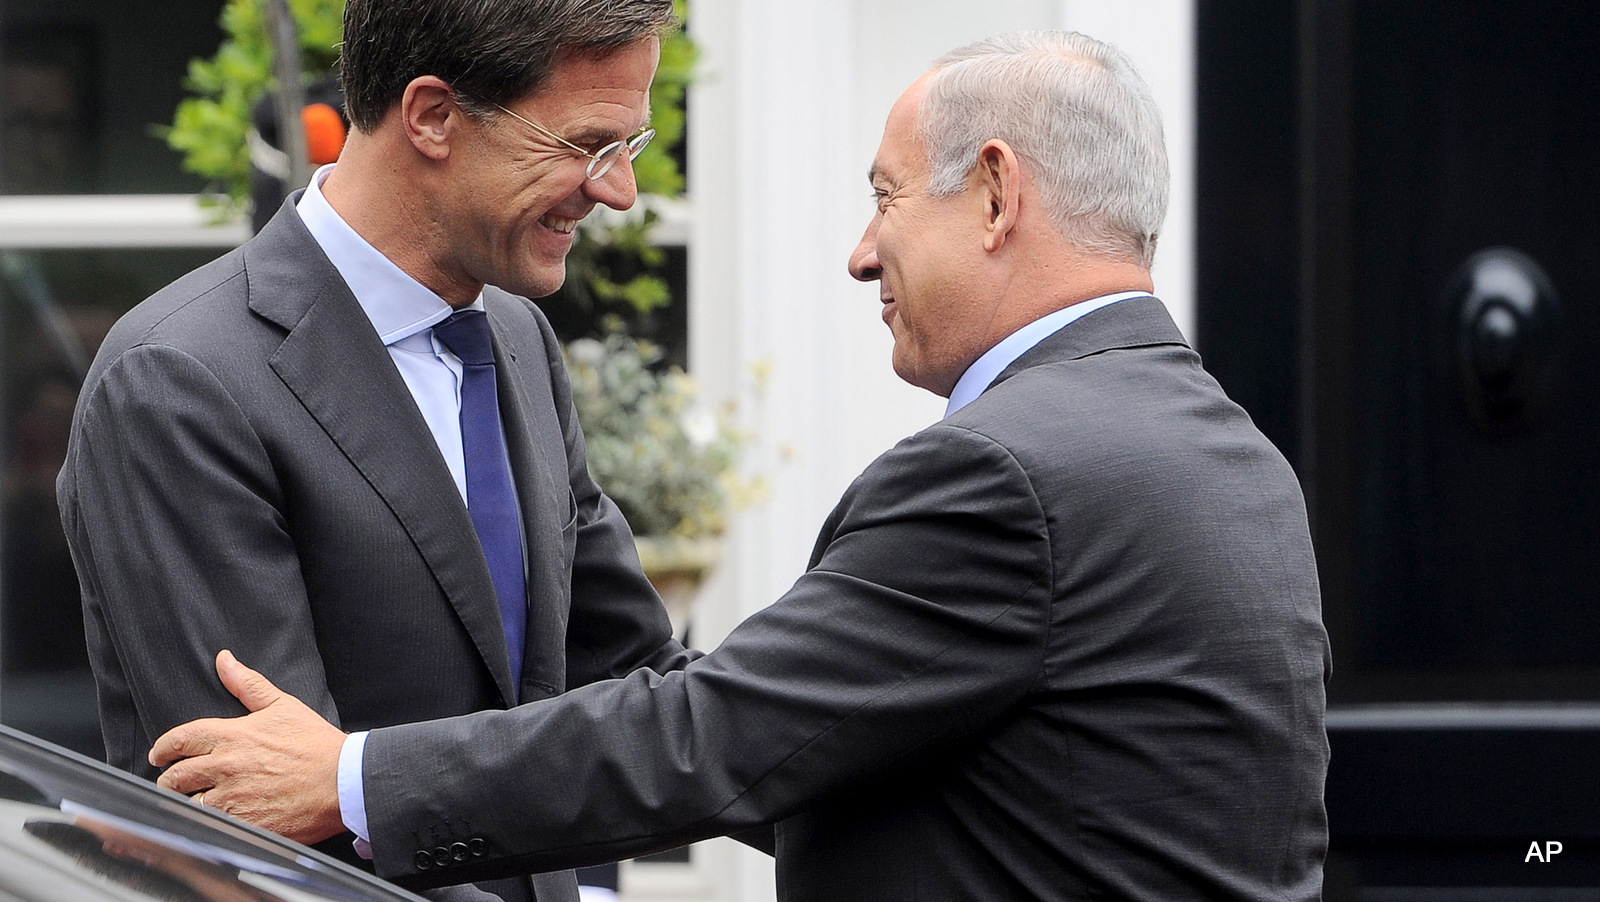 Israel's Prime Minister Benjamin Netanyahu, right, is greeted by Dutch Prime Minister Mark Rutte prior to a meeting in The Hague, Netherlands, Tuesday, Sept. 6, 2016. 